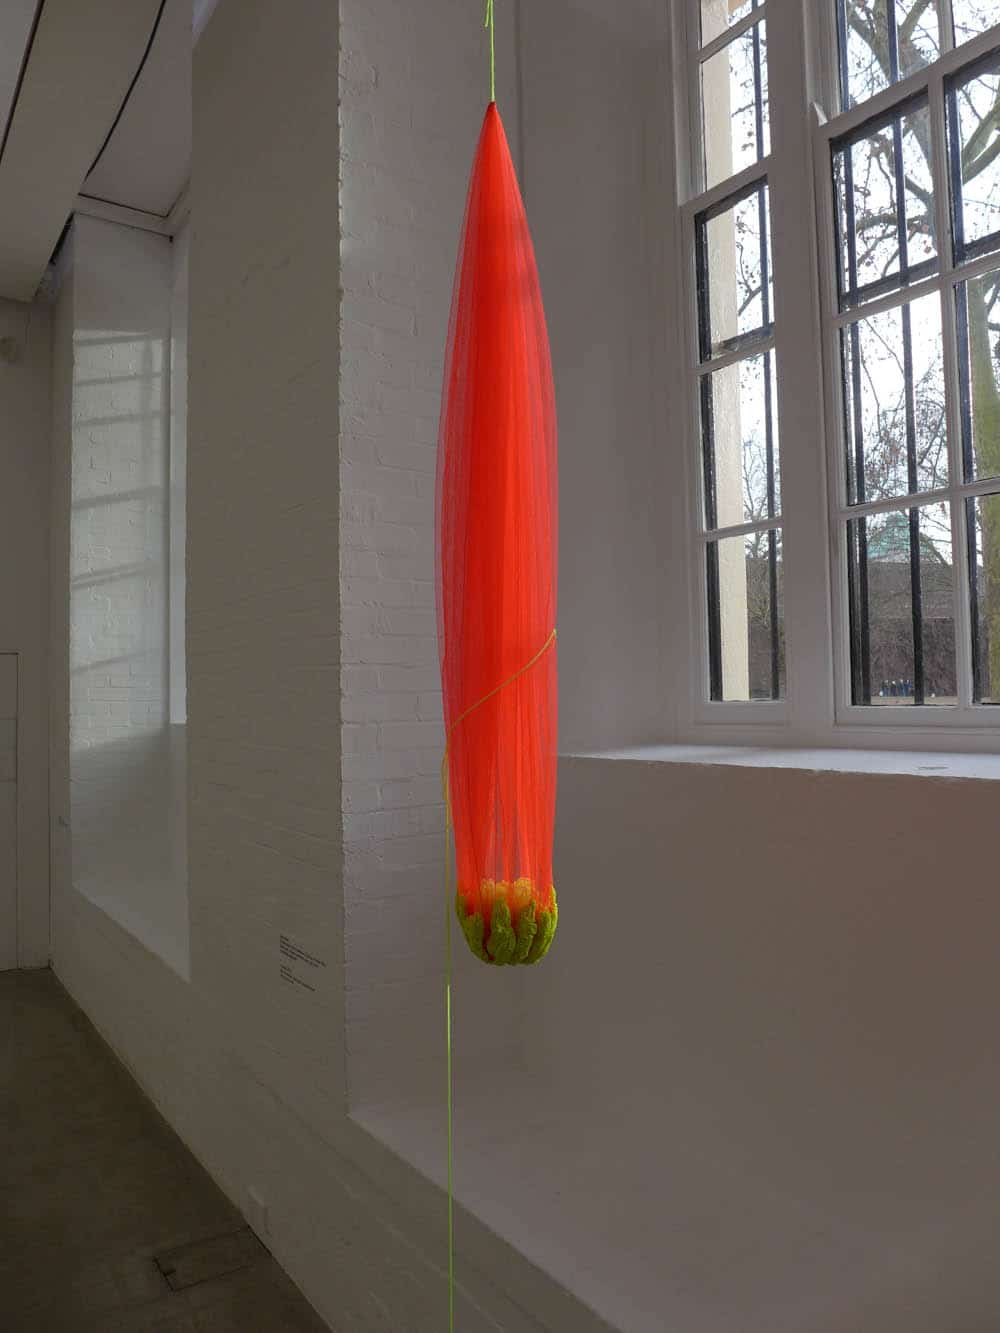 Emily Motto, Parasite, 2013, Bloomberg New Contemporaries 2014 